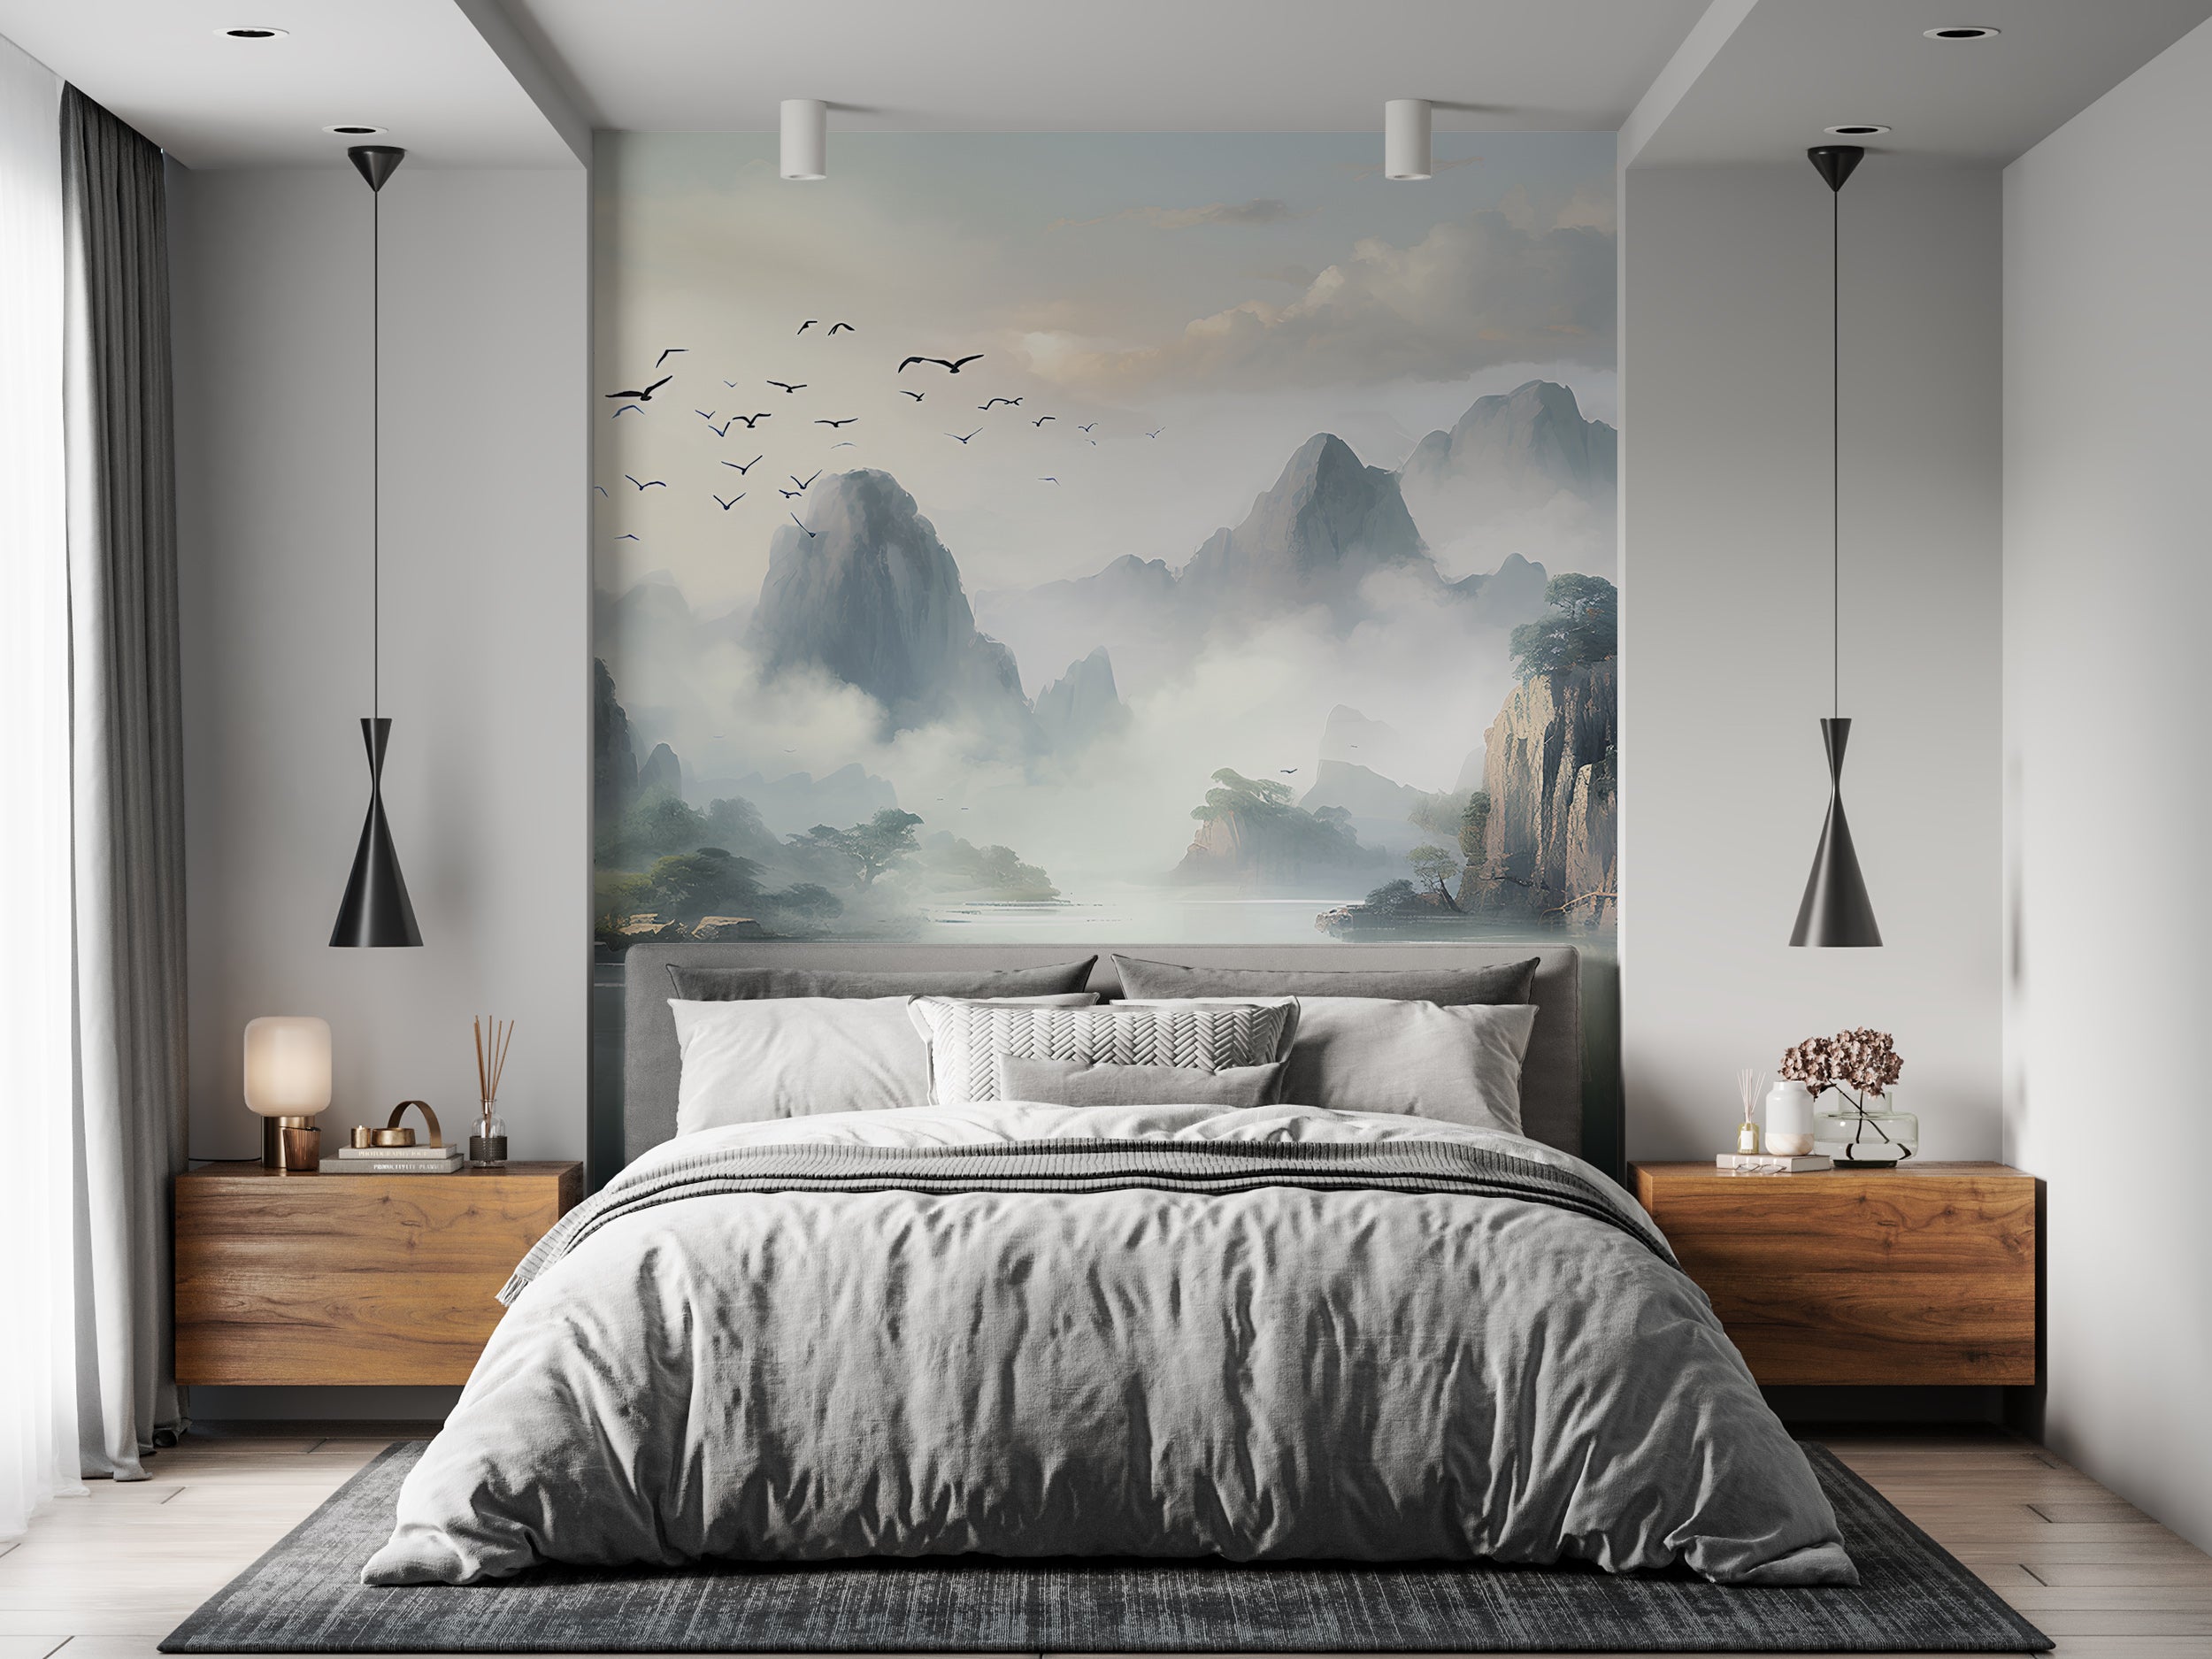 Removable Foggy Nature Wall Art